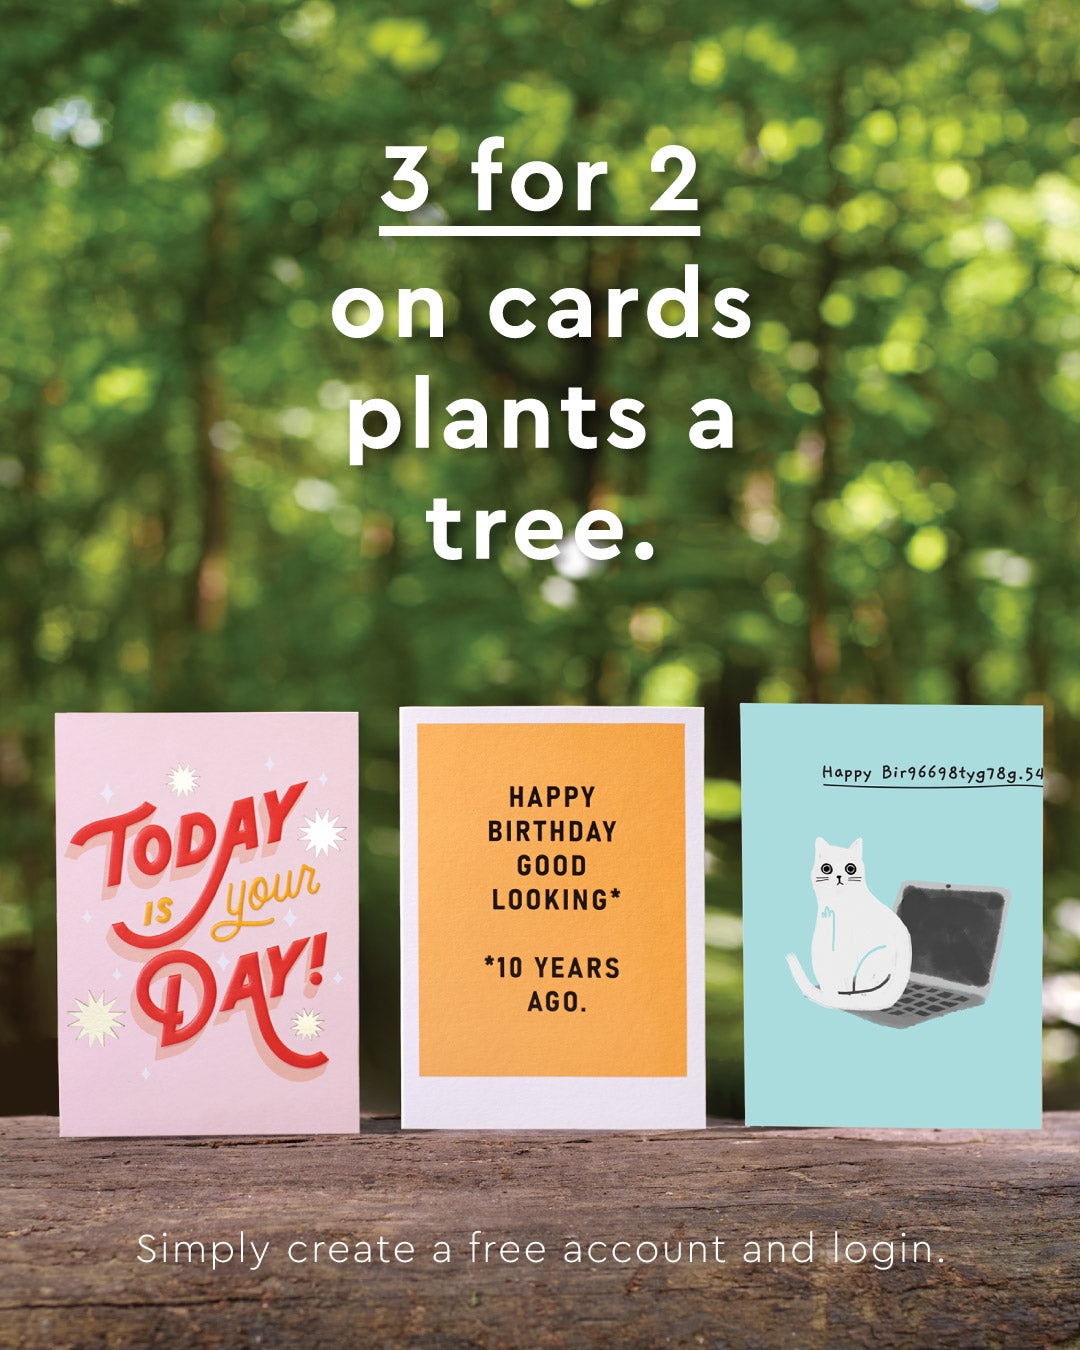 3 for 2 on cards plants a tree banner image